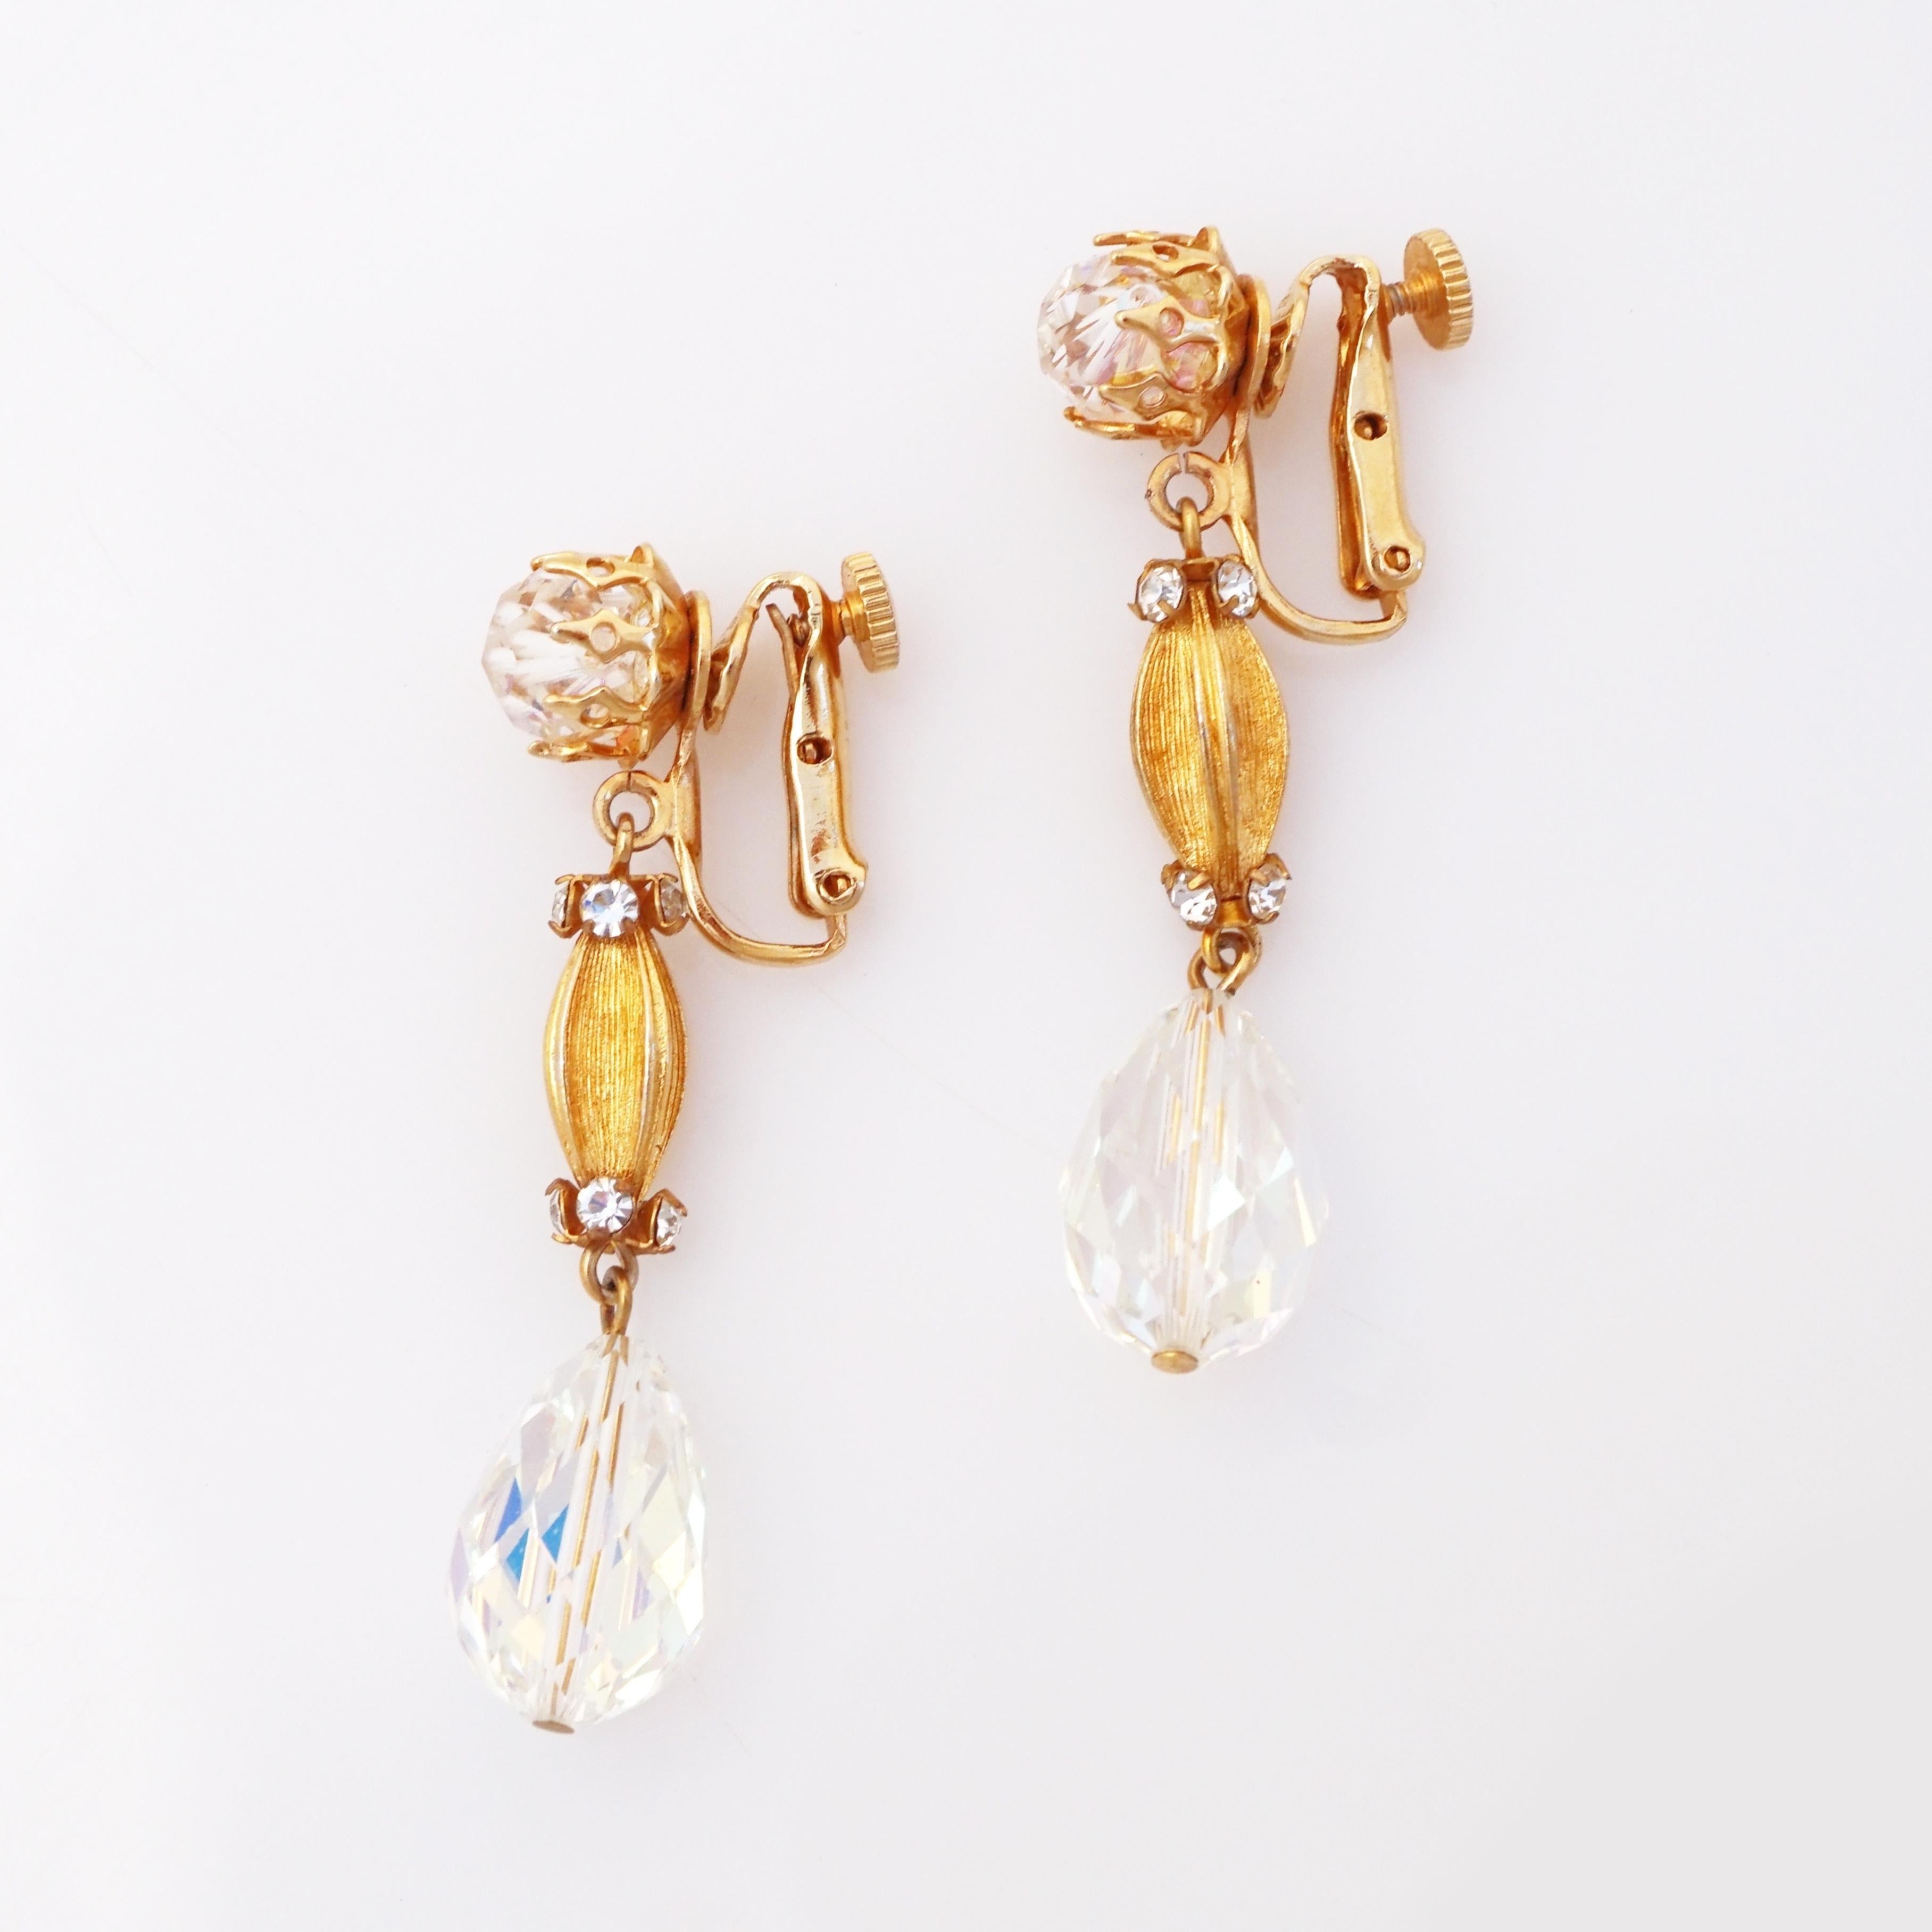 - Vintage item

- Collectible costume jewelry piece from the mid-century

- Each earring measures 2